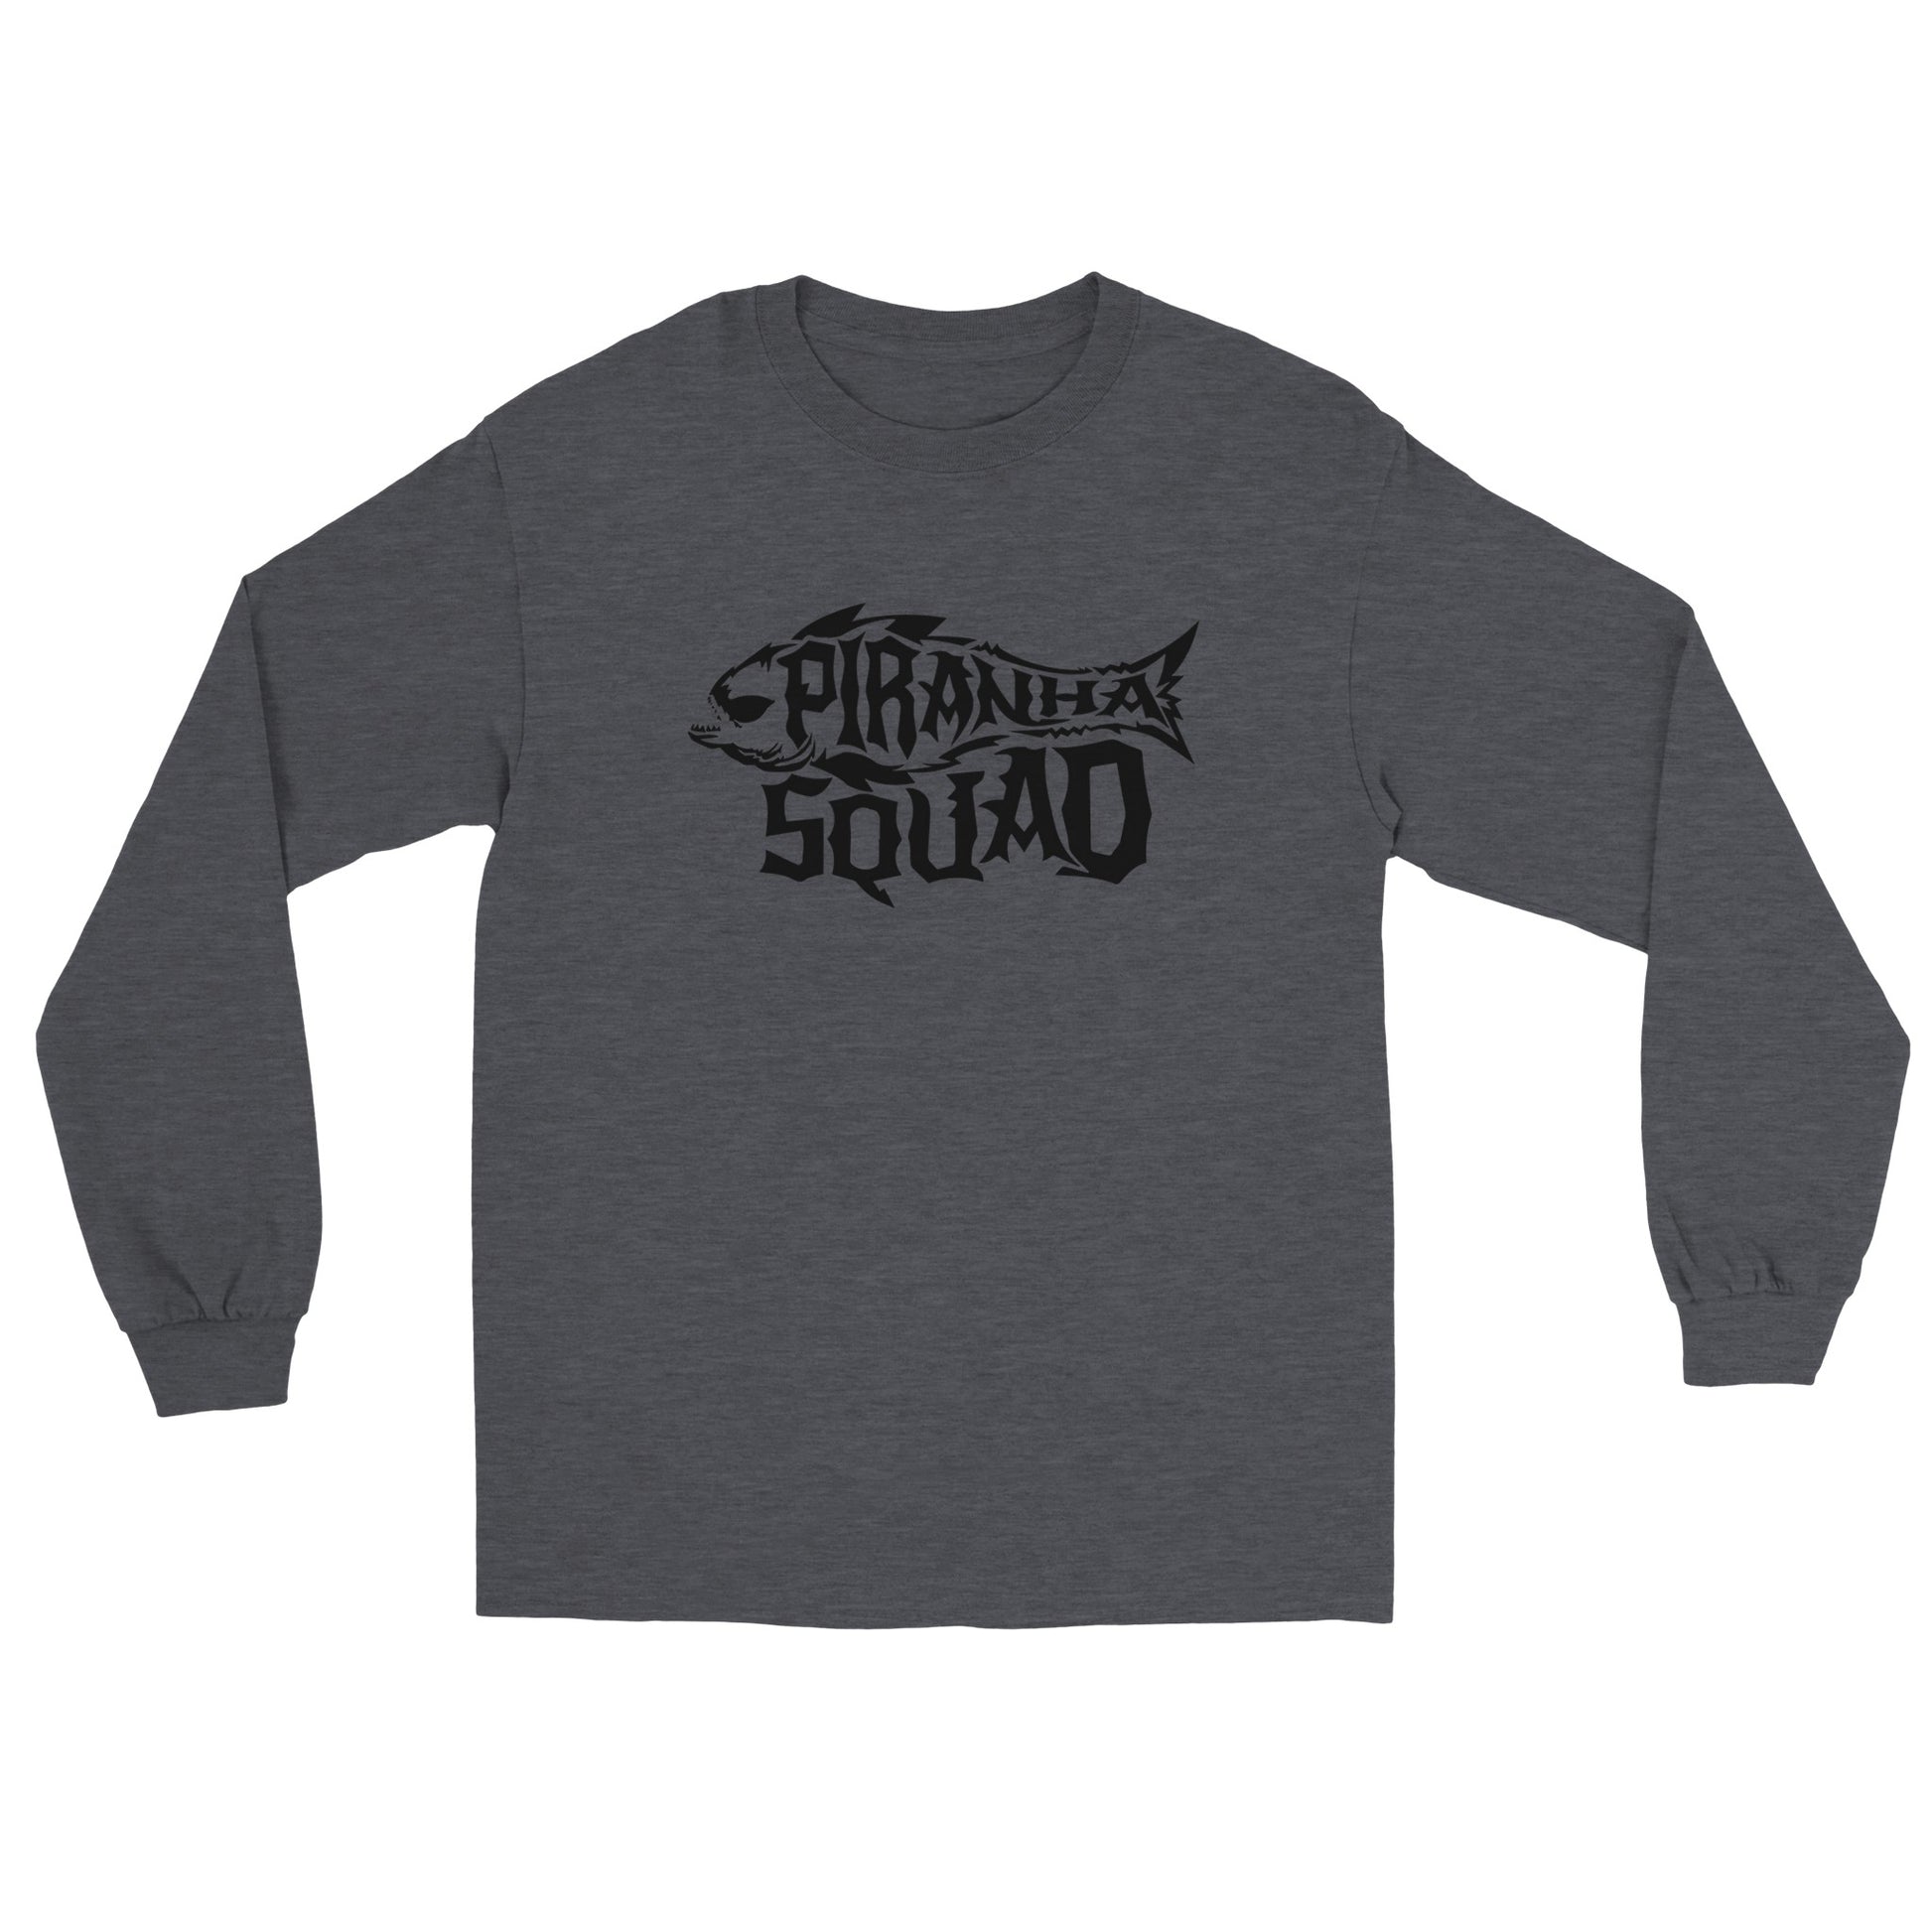 a gray long sleeve shirt with the words pirates squad on it